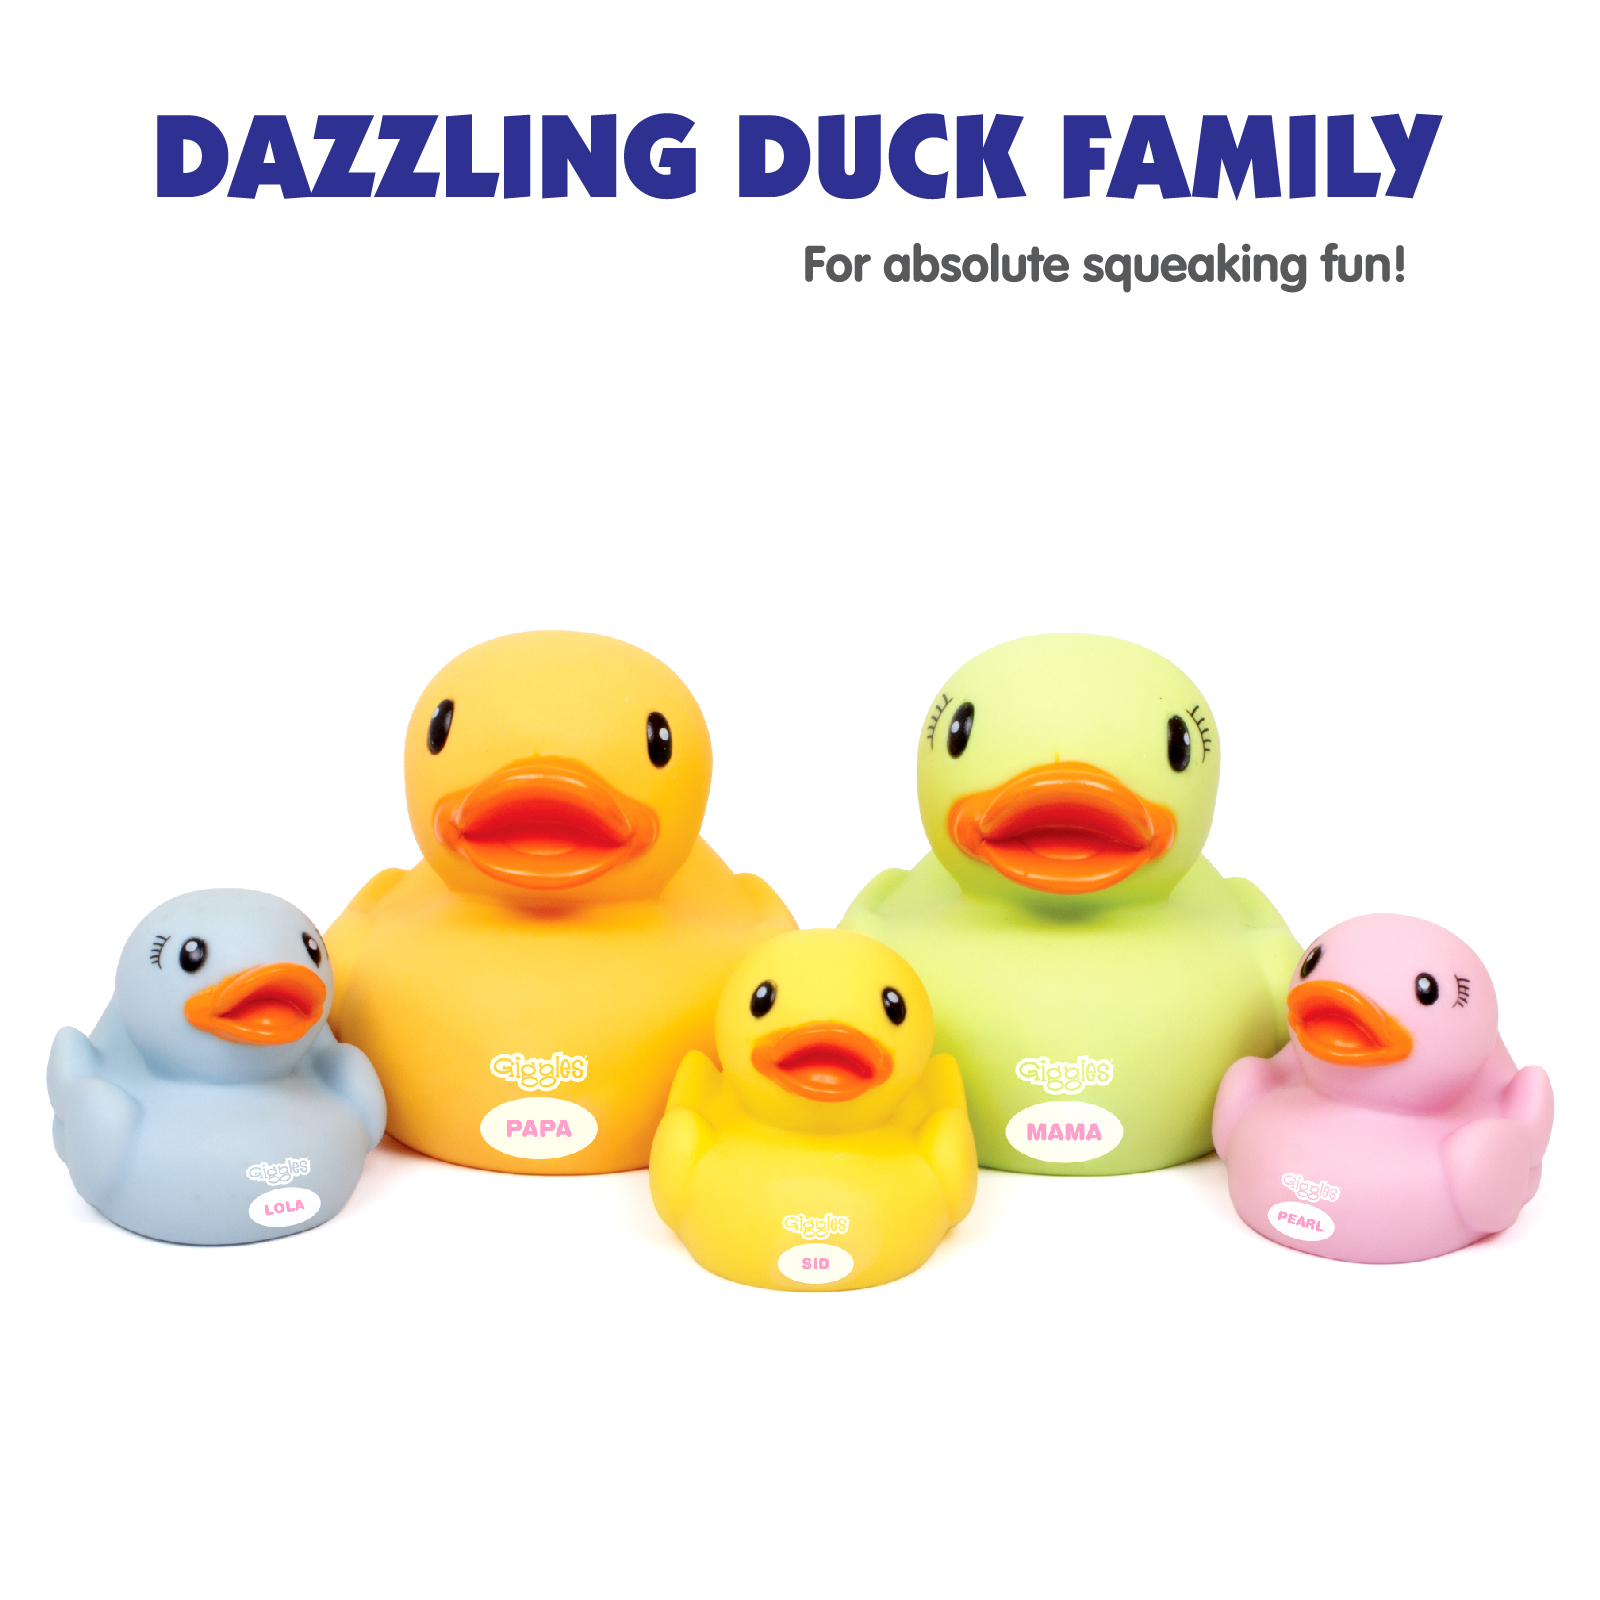 Giggles Dazzling Duck Family Squeakers